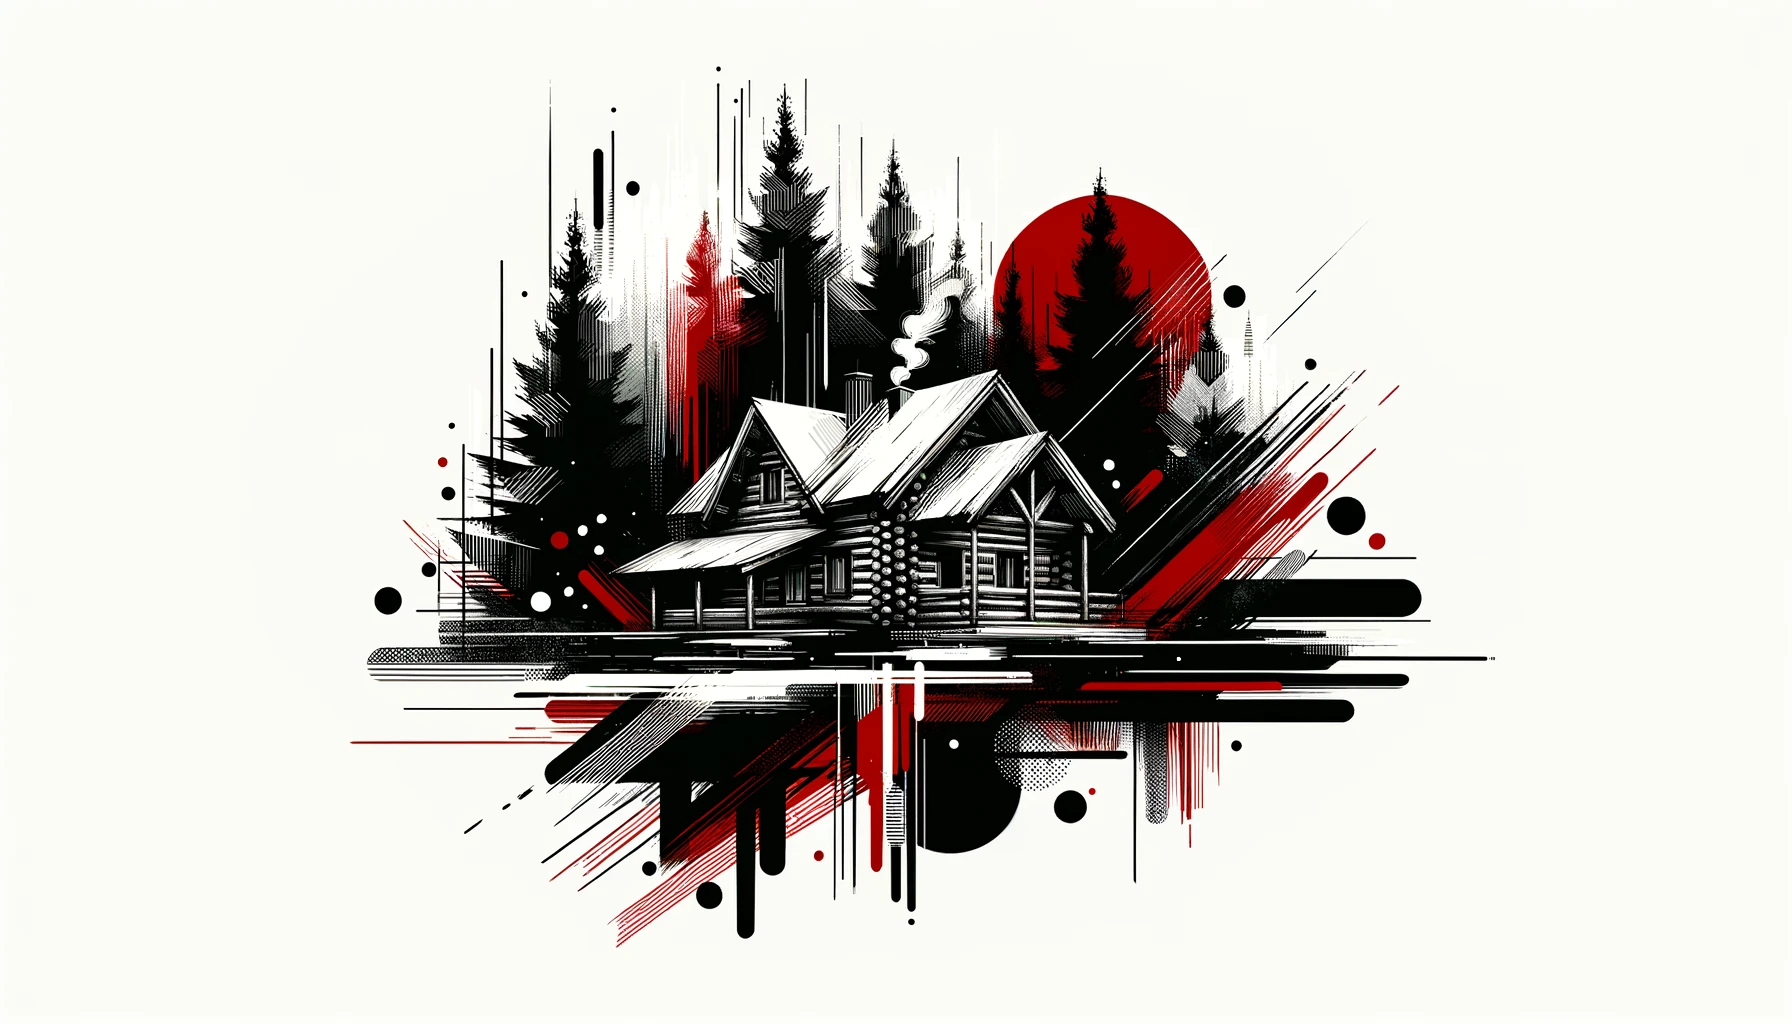 Abstract black and white illustration of a cabin and pine trees with red artistic elements, symbolizing homes with recreational land for sale.